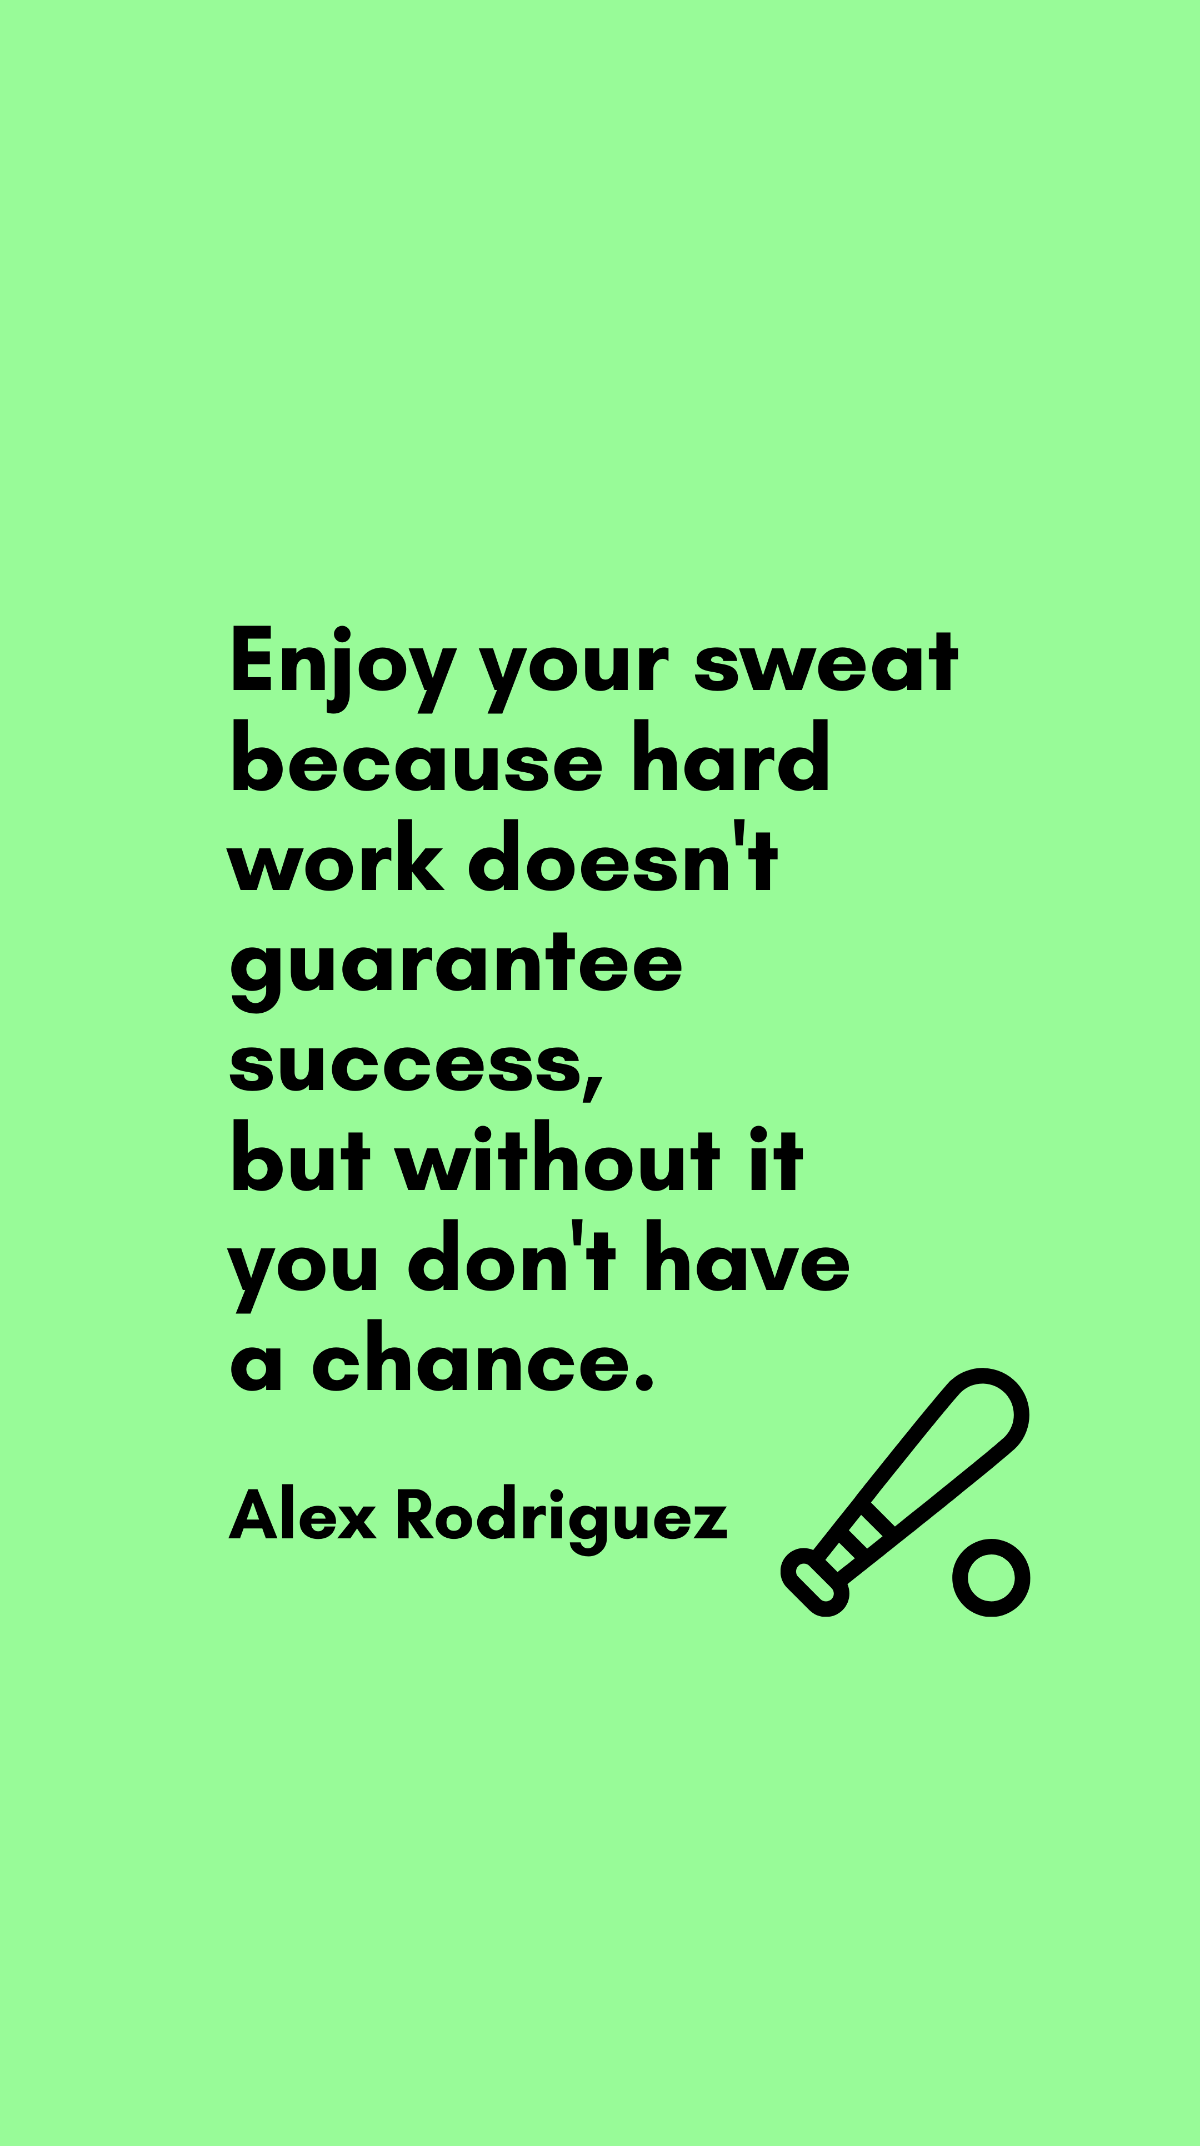 Free Alex Rodriguez - Enjoy your sweat because hard work doesn't guarantee success, but without it you don't have a chance. Template